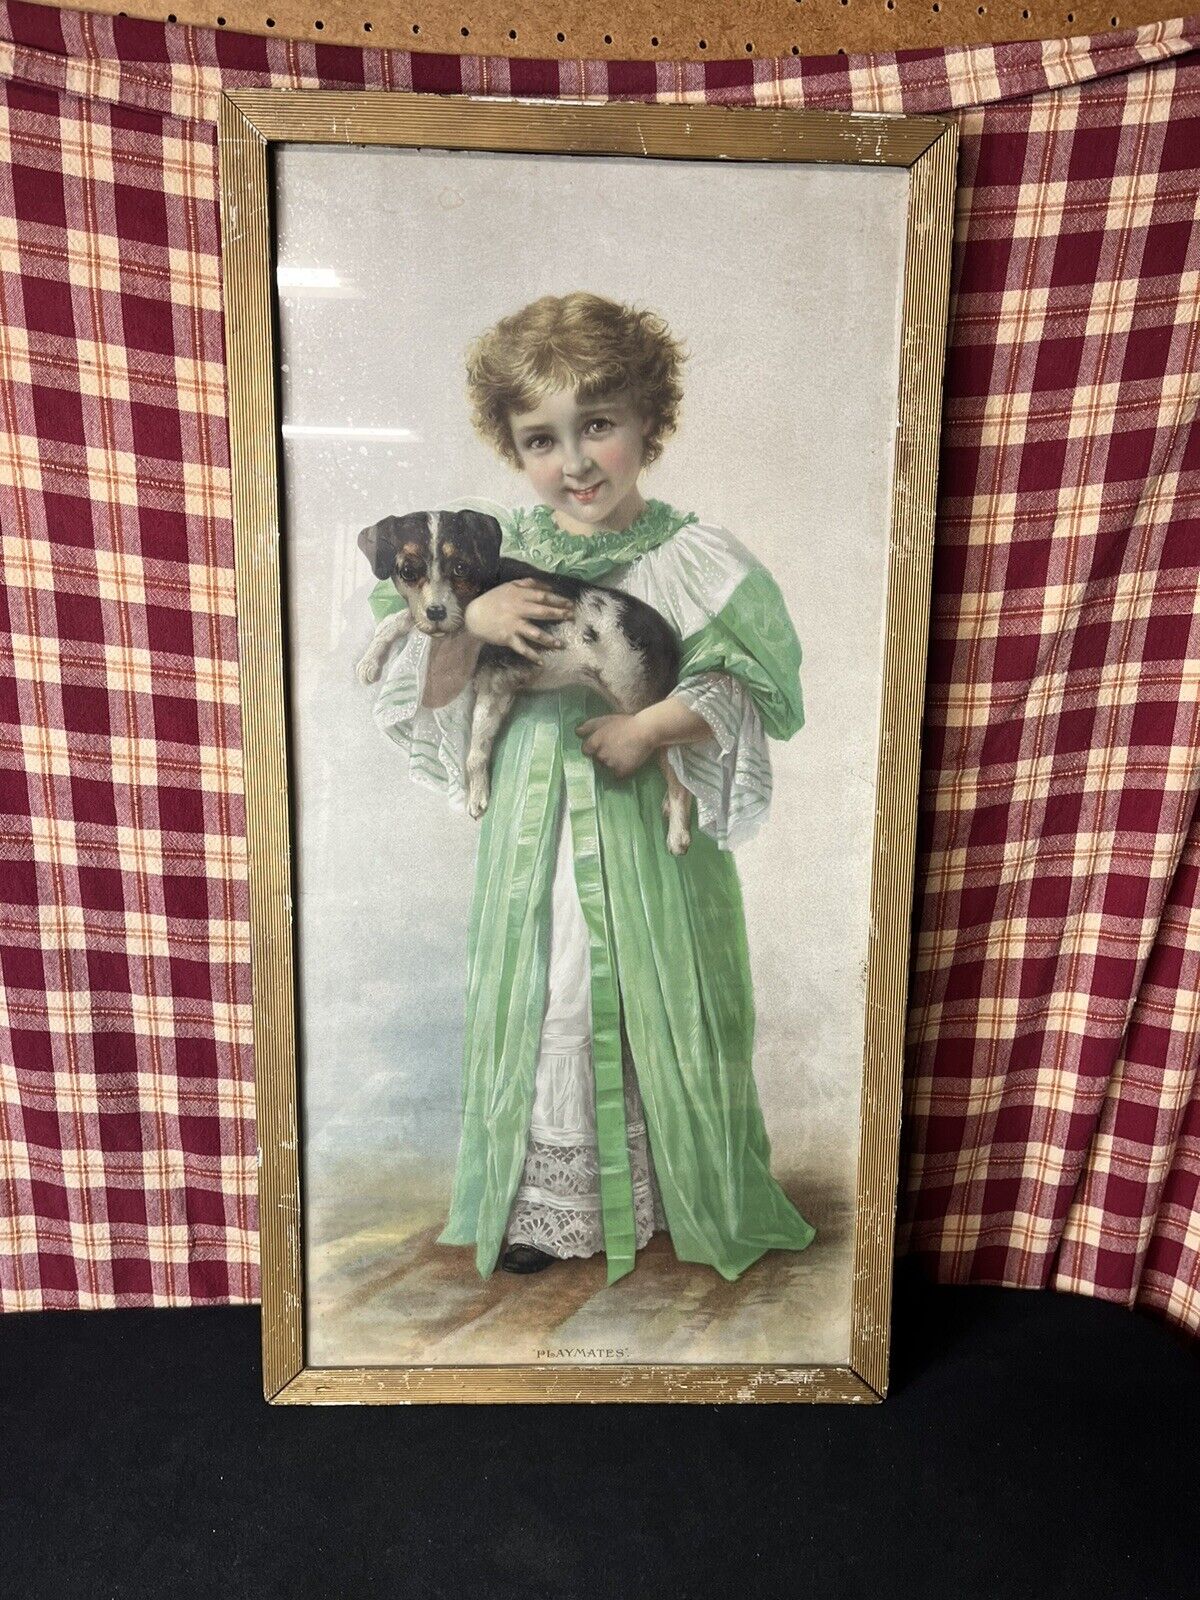 ATQ. 1895 WOOLSEN SPICE CO. LITHOGRAPH  PLAYMATES / GIRL with DOG 30 X 16